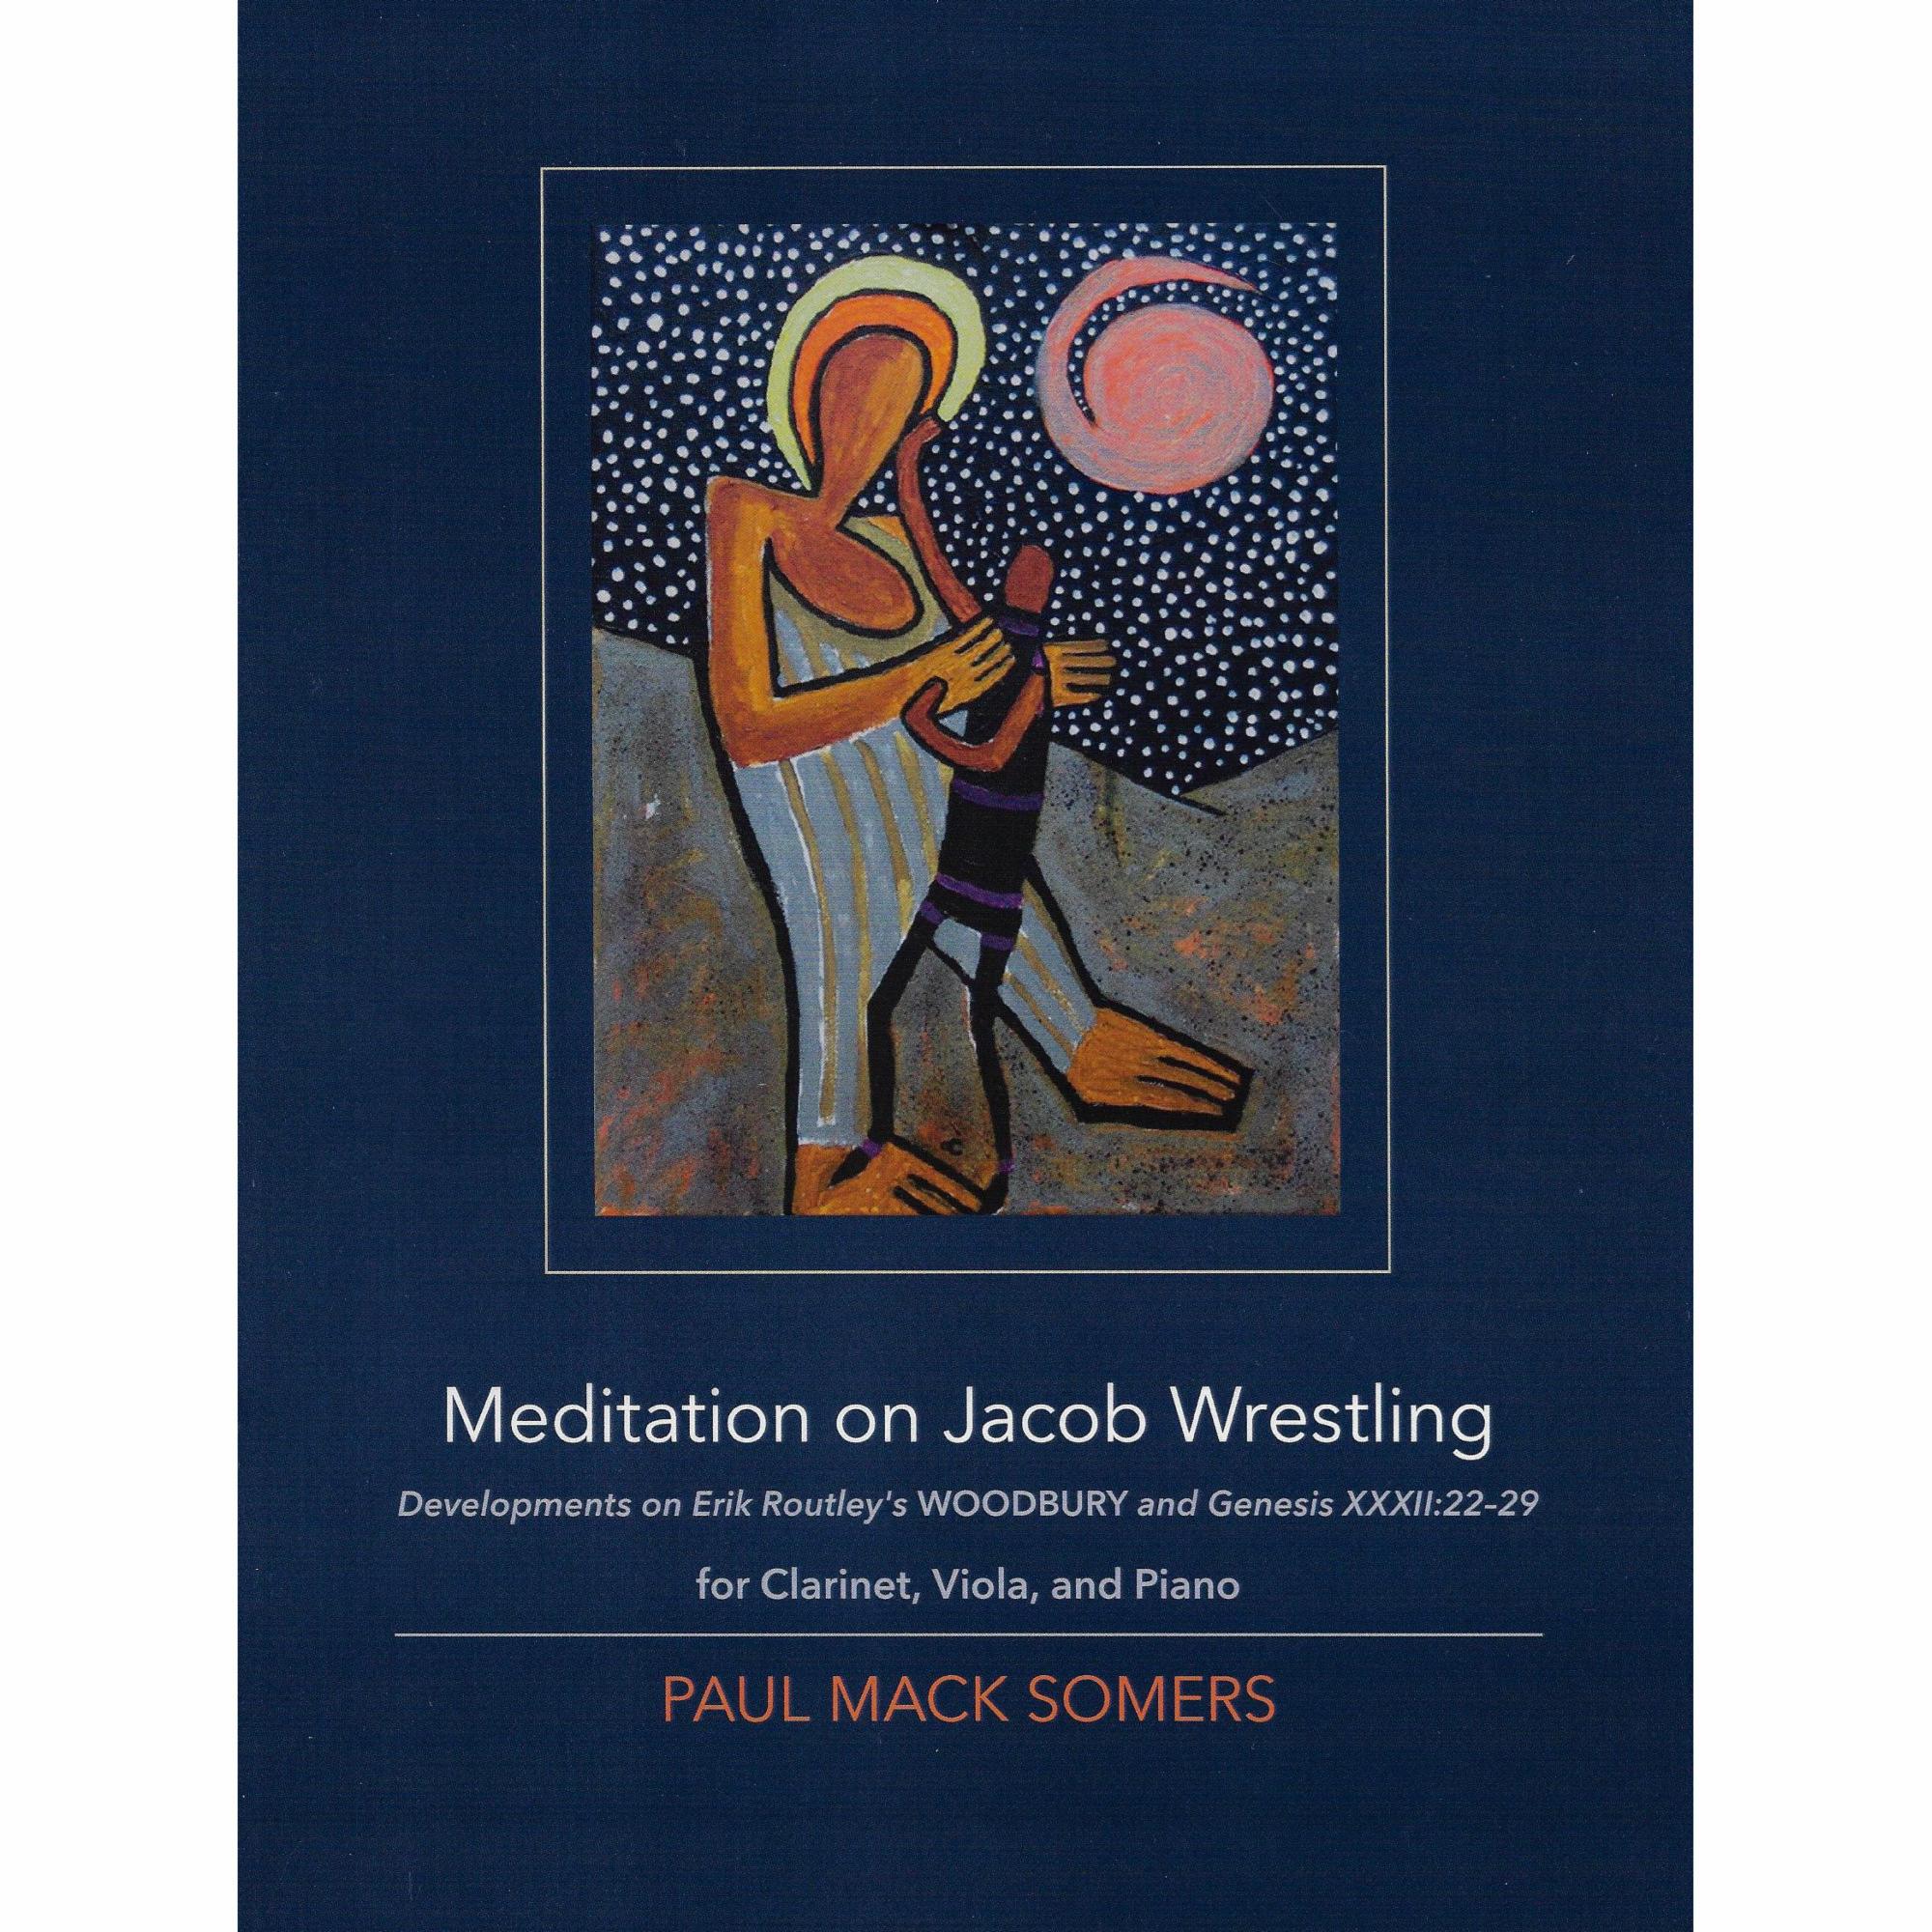 Somers -- Meditation on Jacob Wrestling for Clarinet, Viola, and Piano